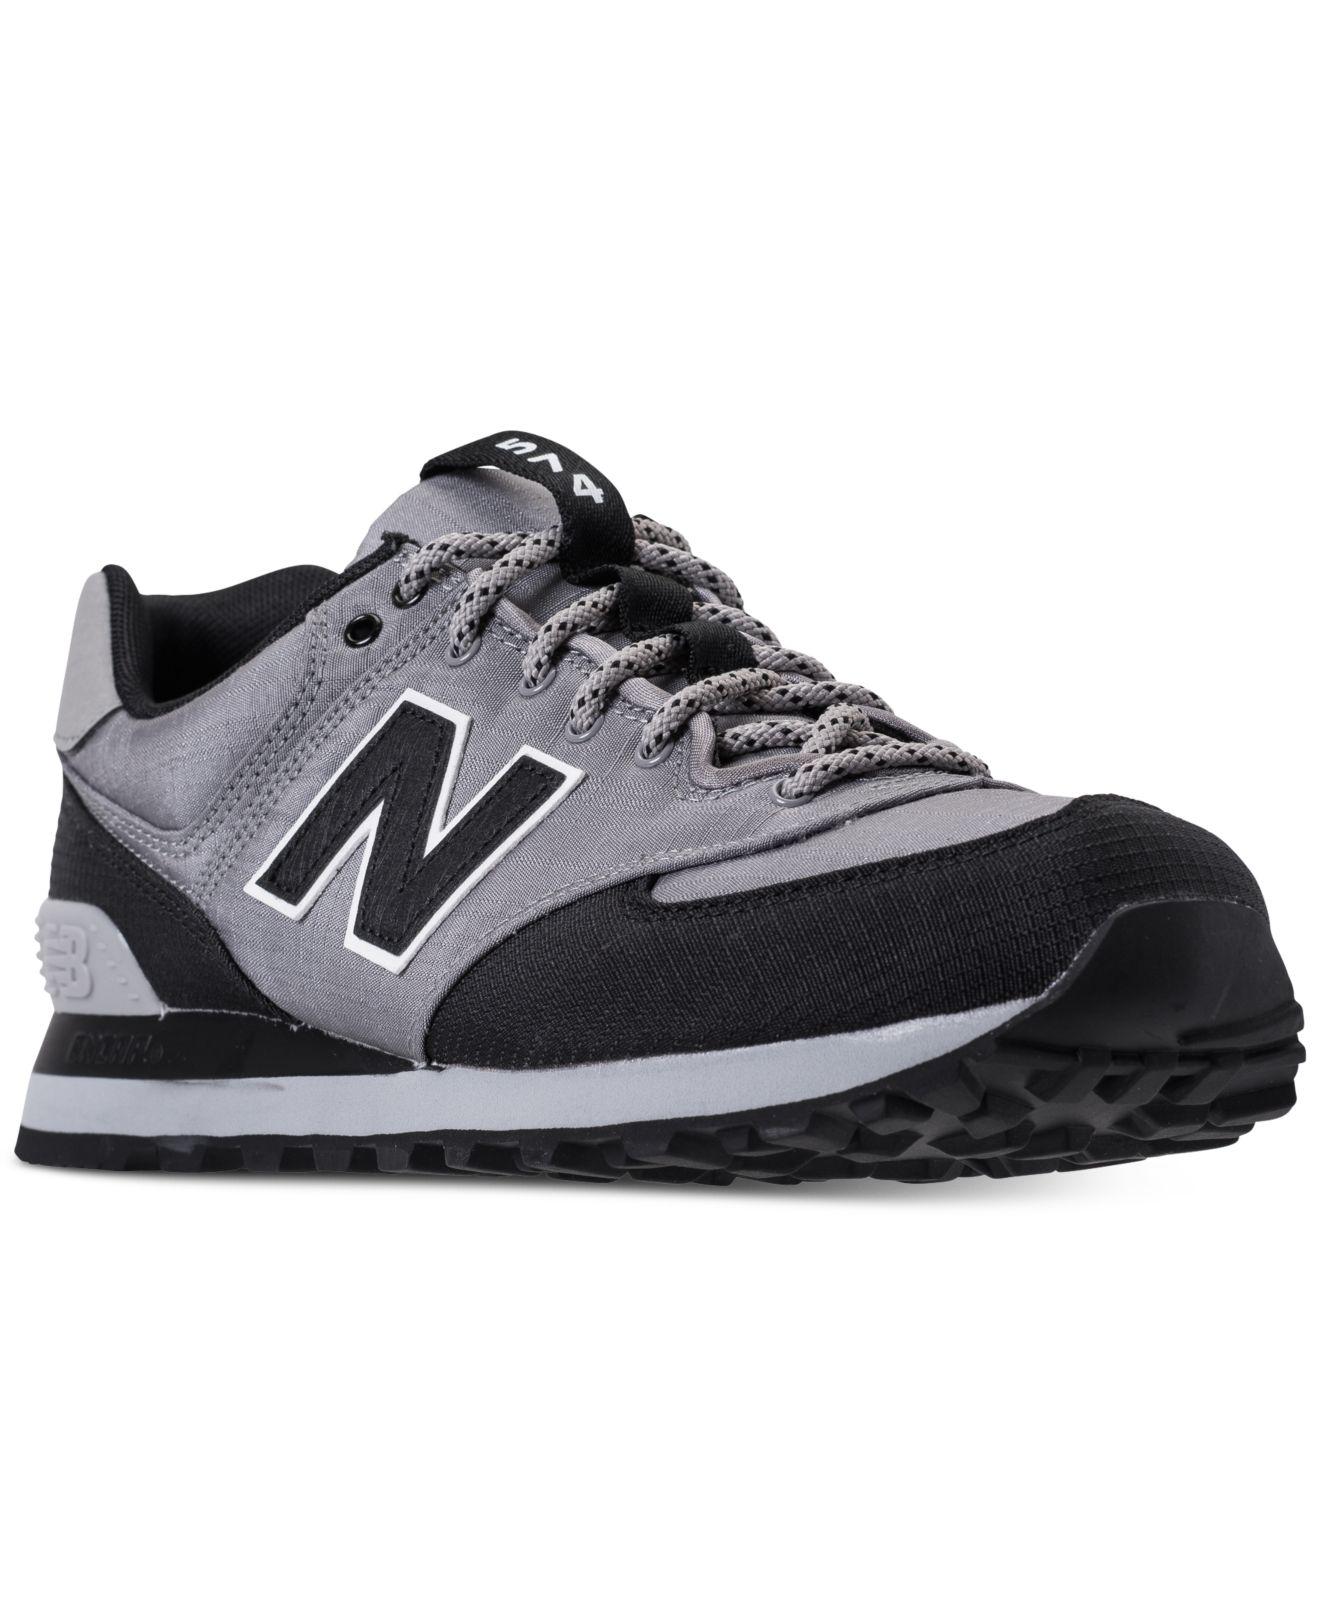 new balance men's 574 outdoor escape shoes navy with grey